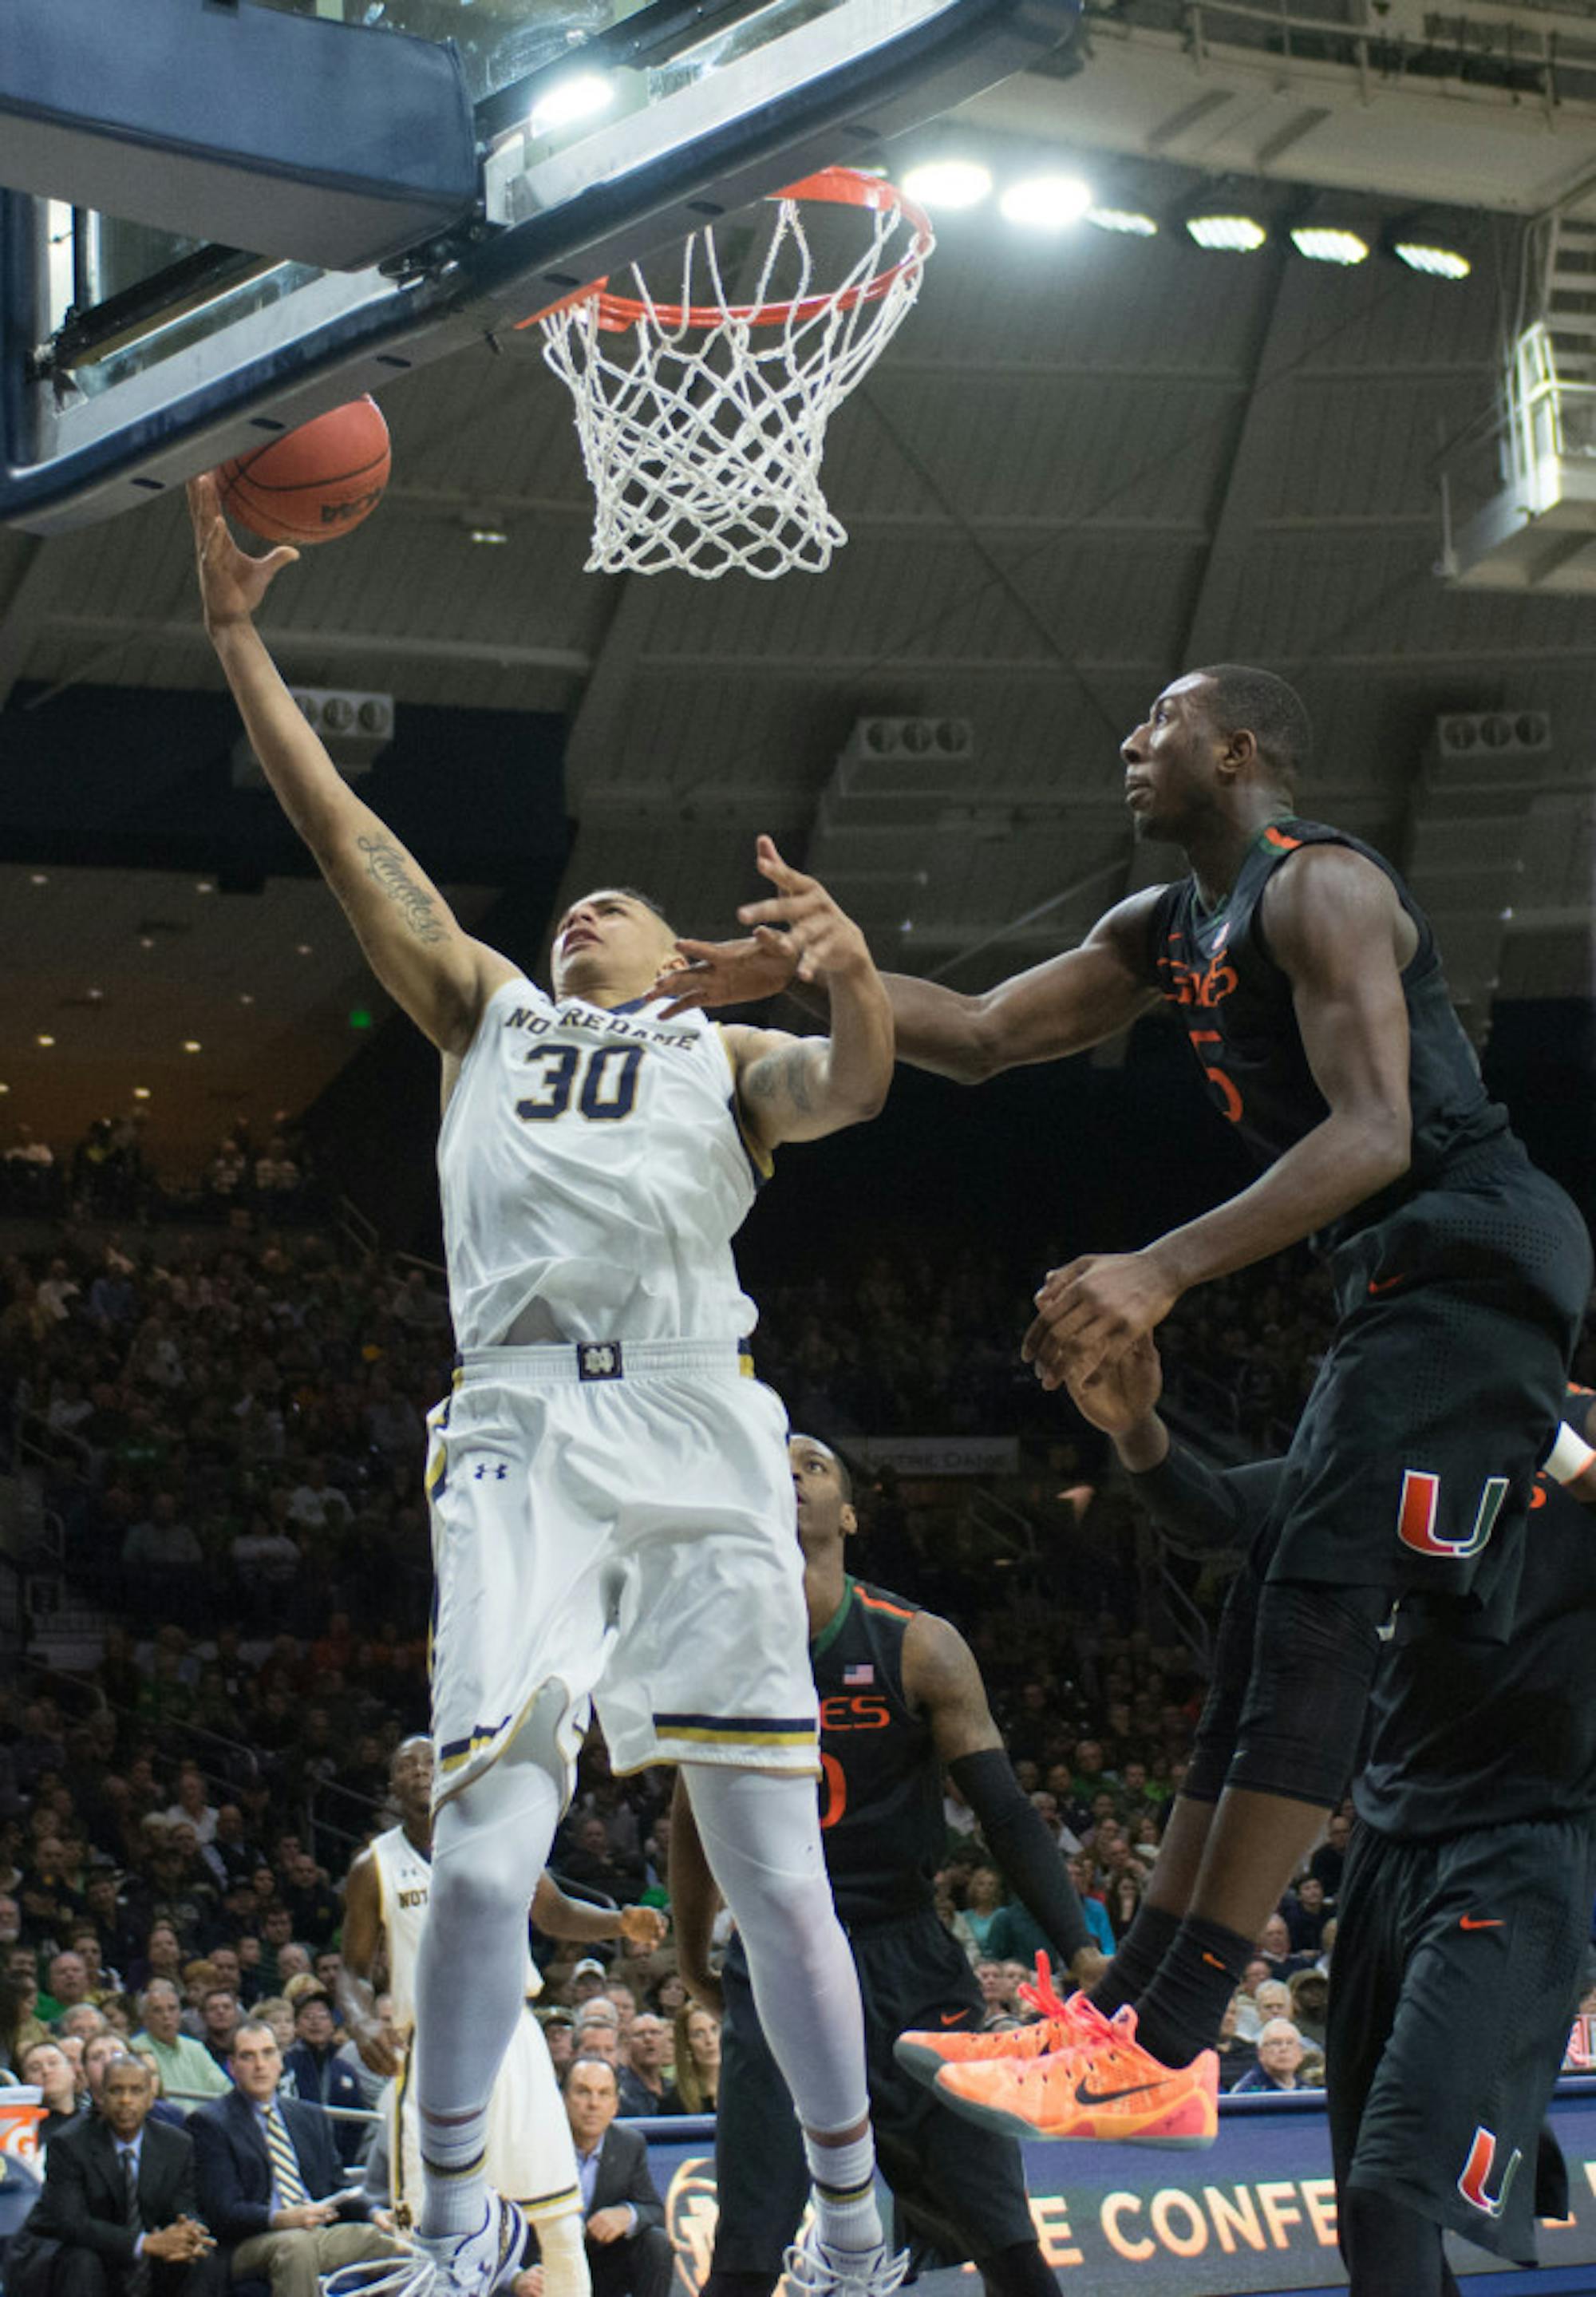 Irish junior forward Zach Auguste jumps up for a layup in a 75-70 Irish win against Miami on Saturday at Purcell Pavilion.